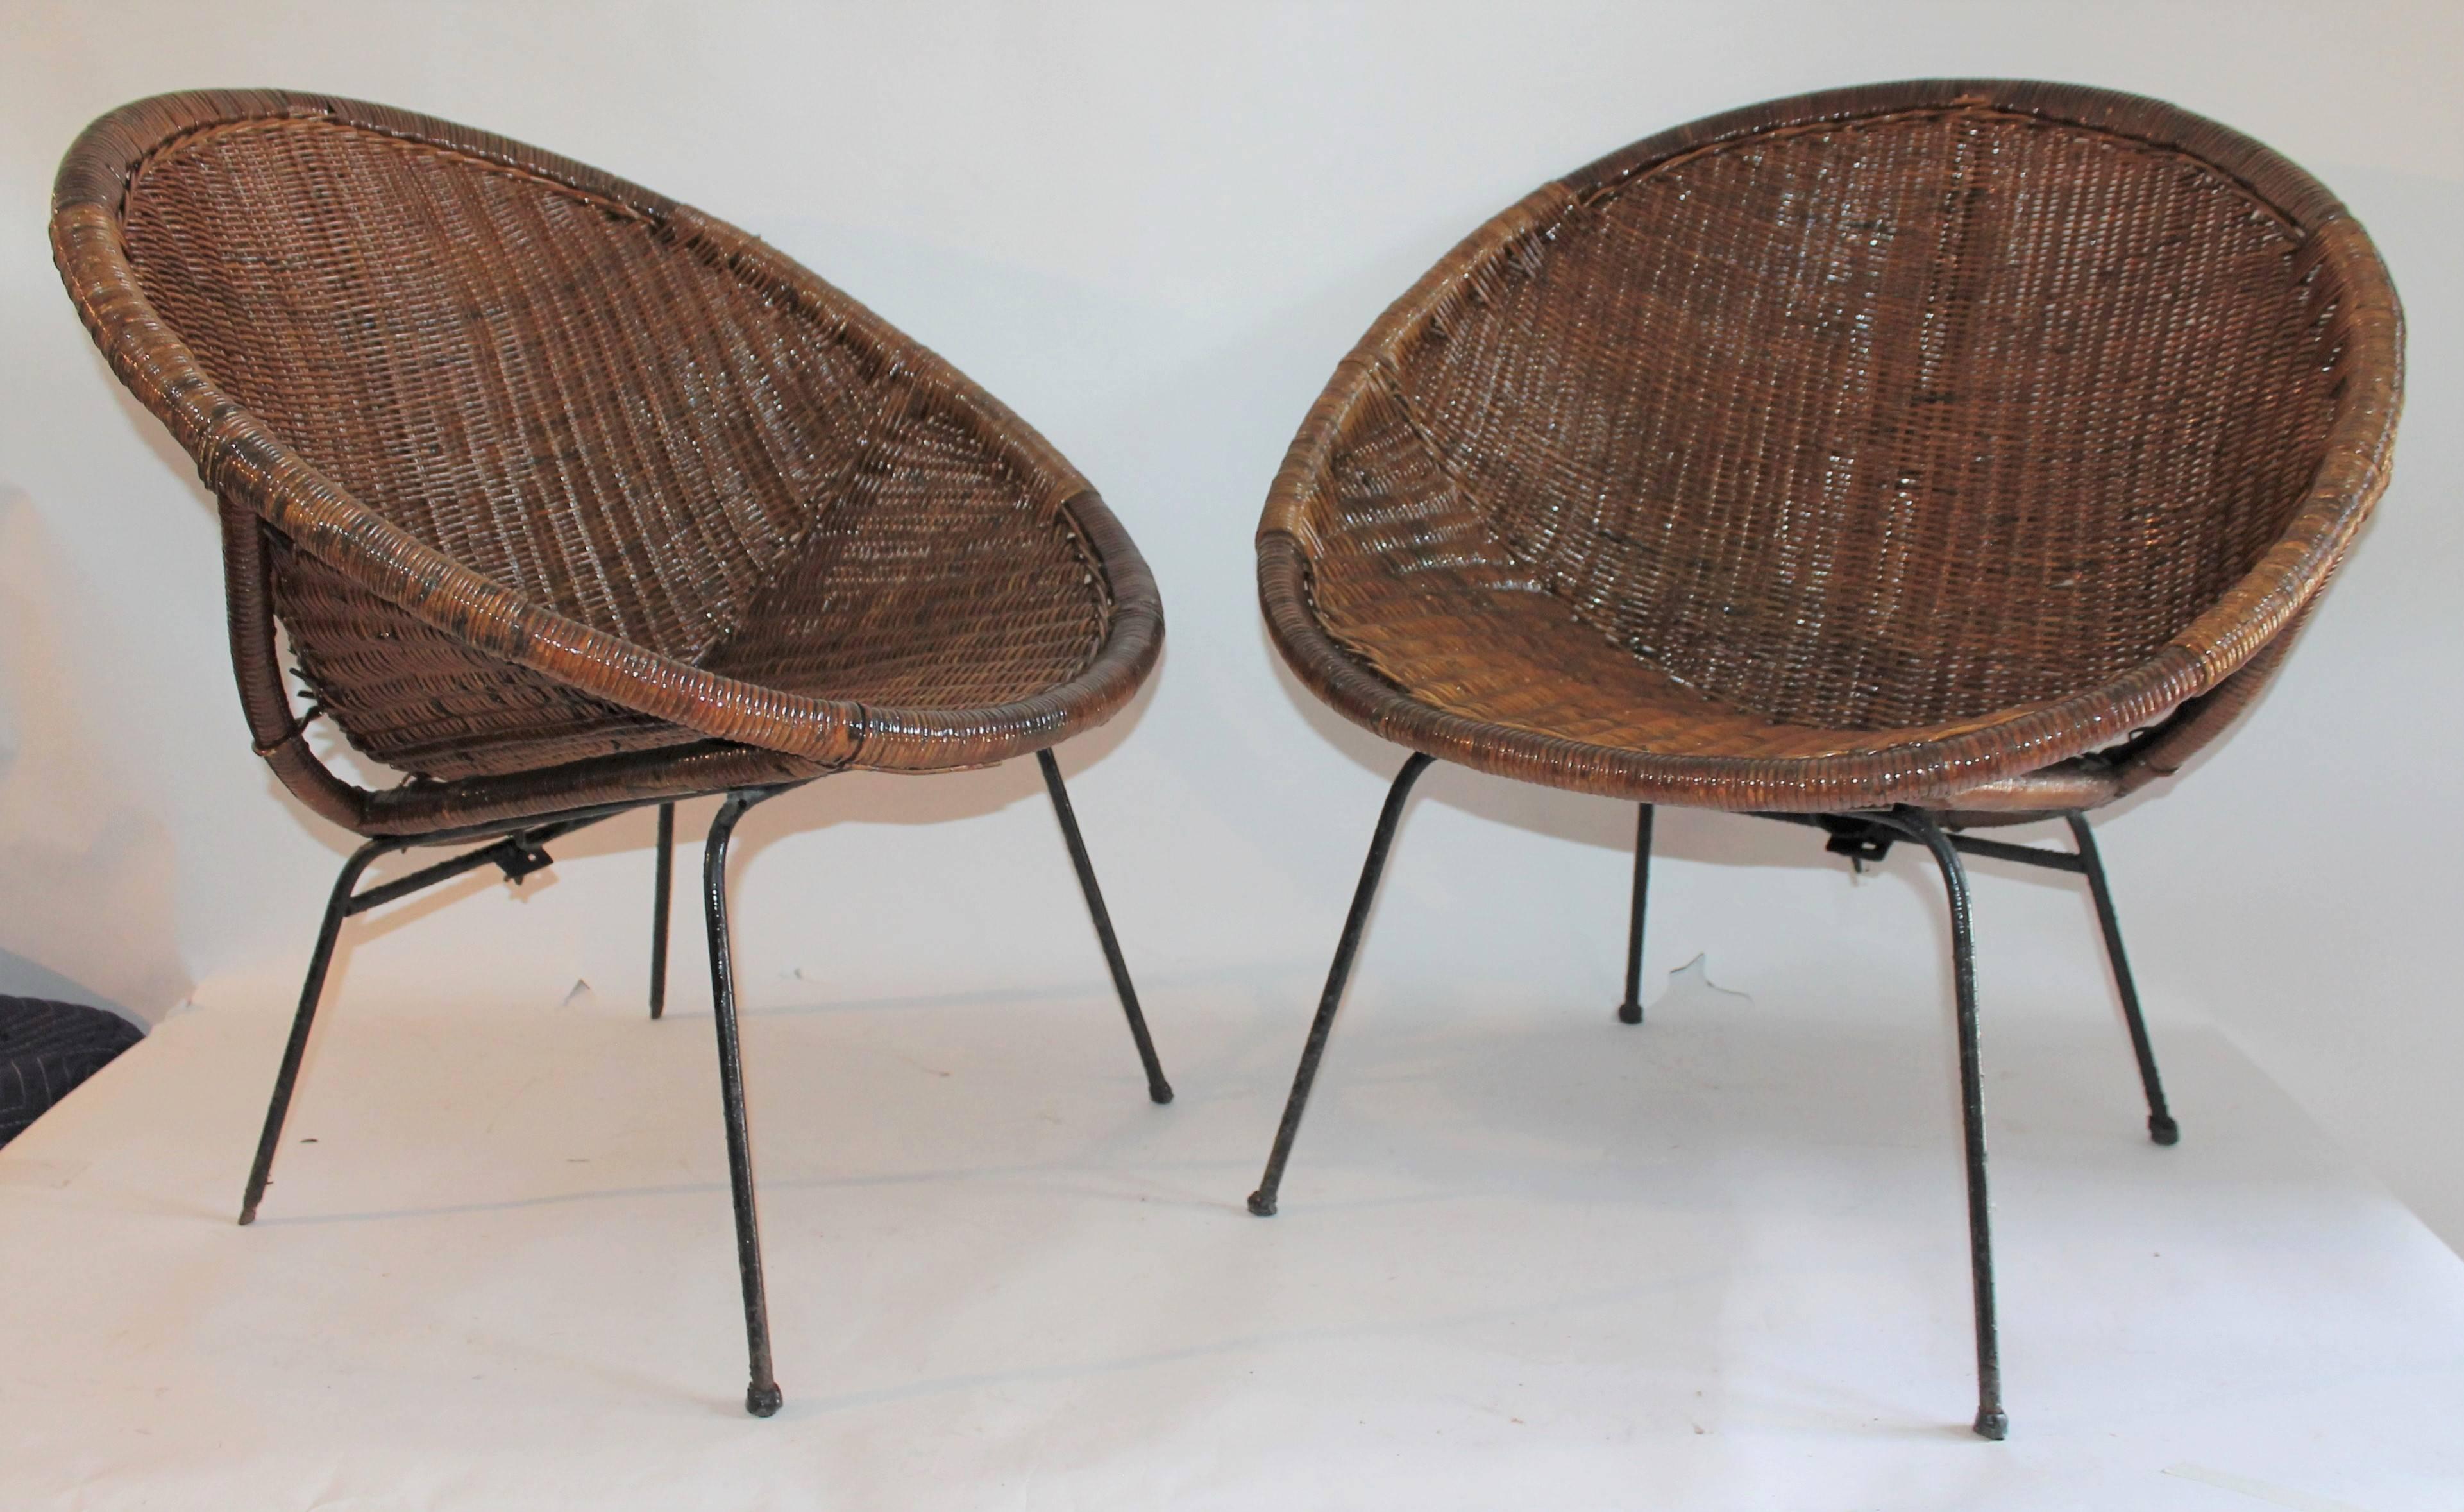 This fine and simple rustic wicker cone style chairs with a natural rustic patina are in fine condition. This set goes great with old hickory furniture and also stream line modern as well. They have the iron post legs on all three pieces. Measure: